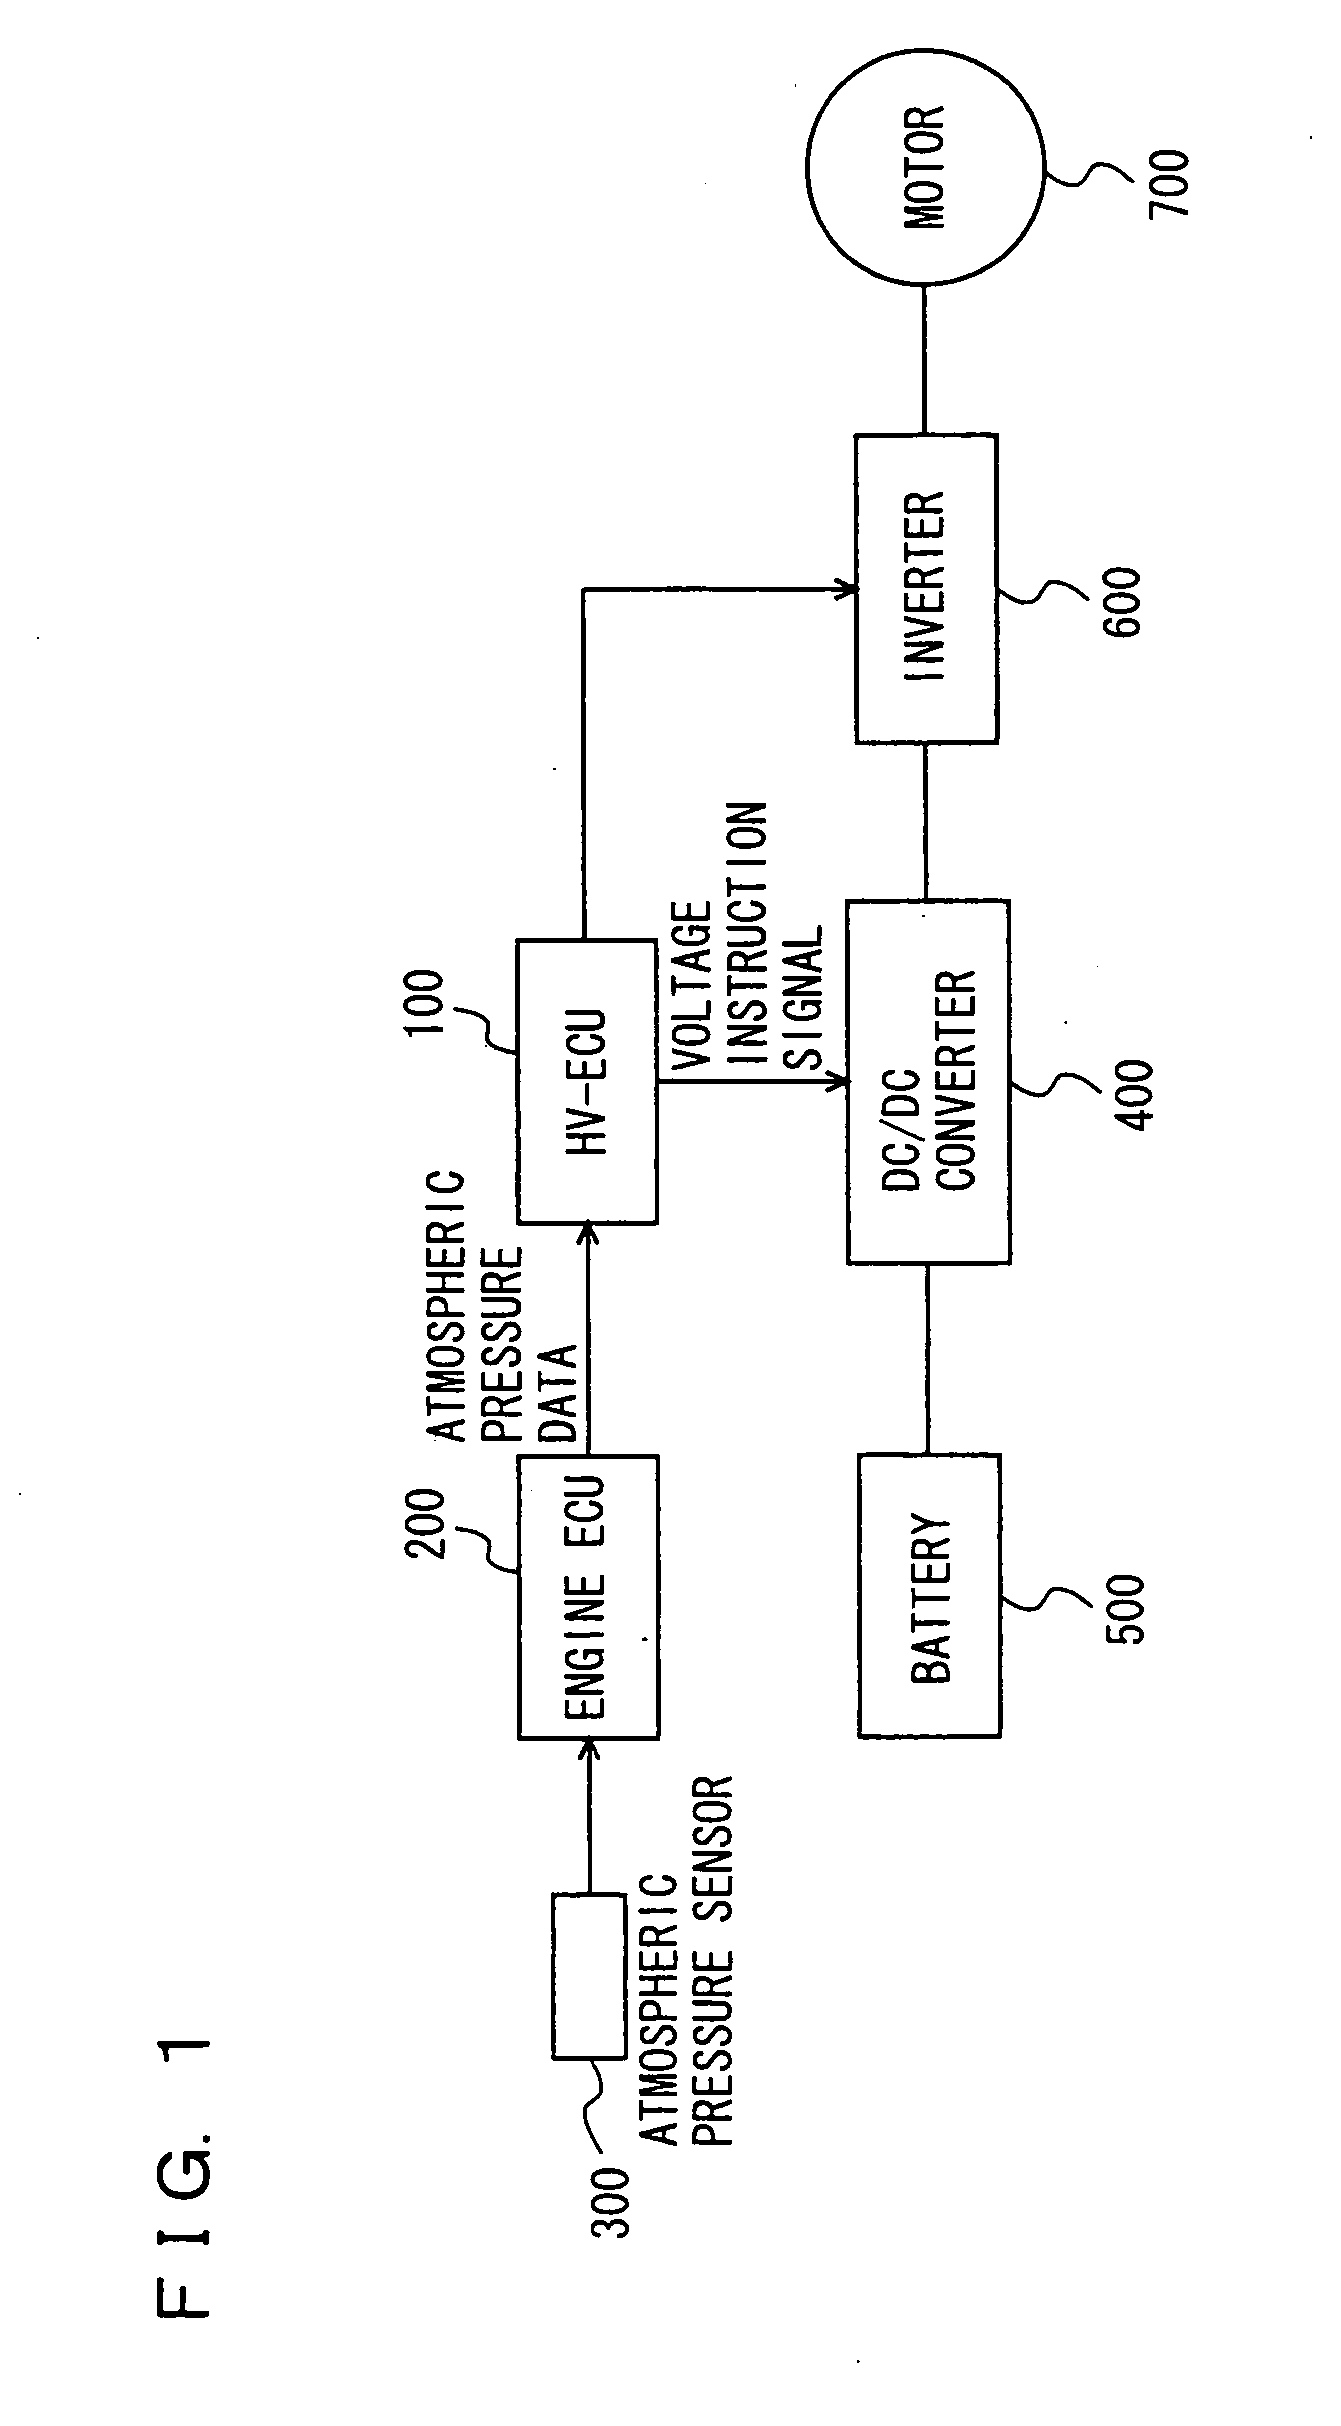 Control device for mobile unit